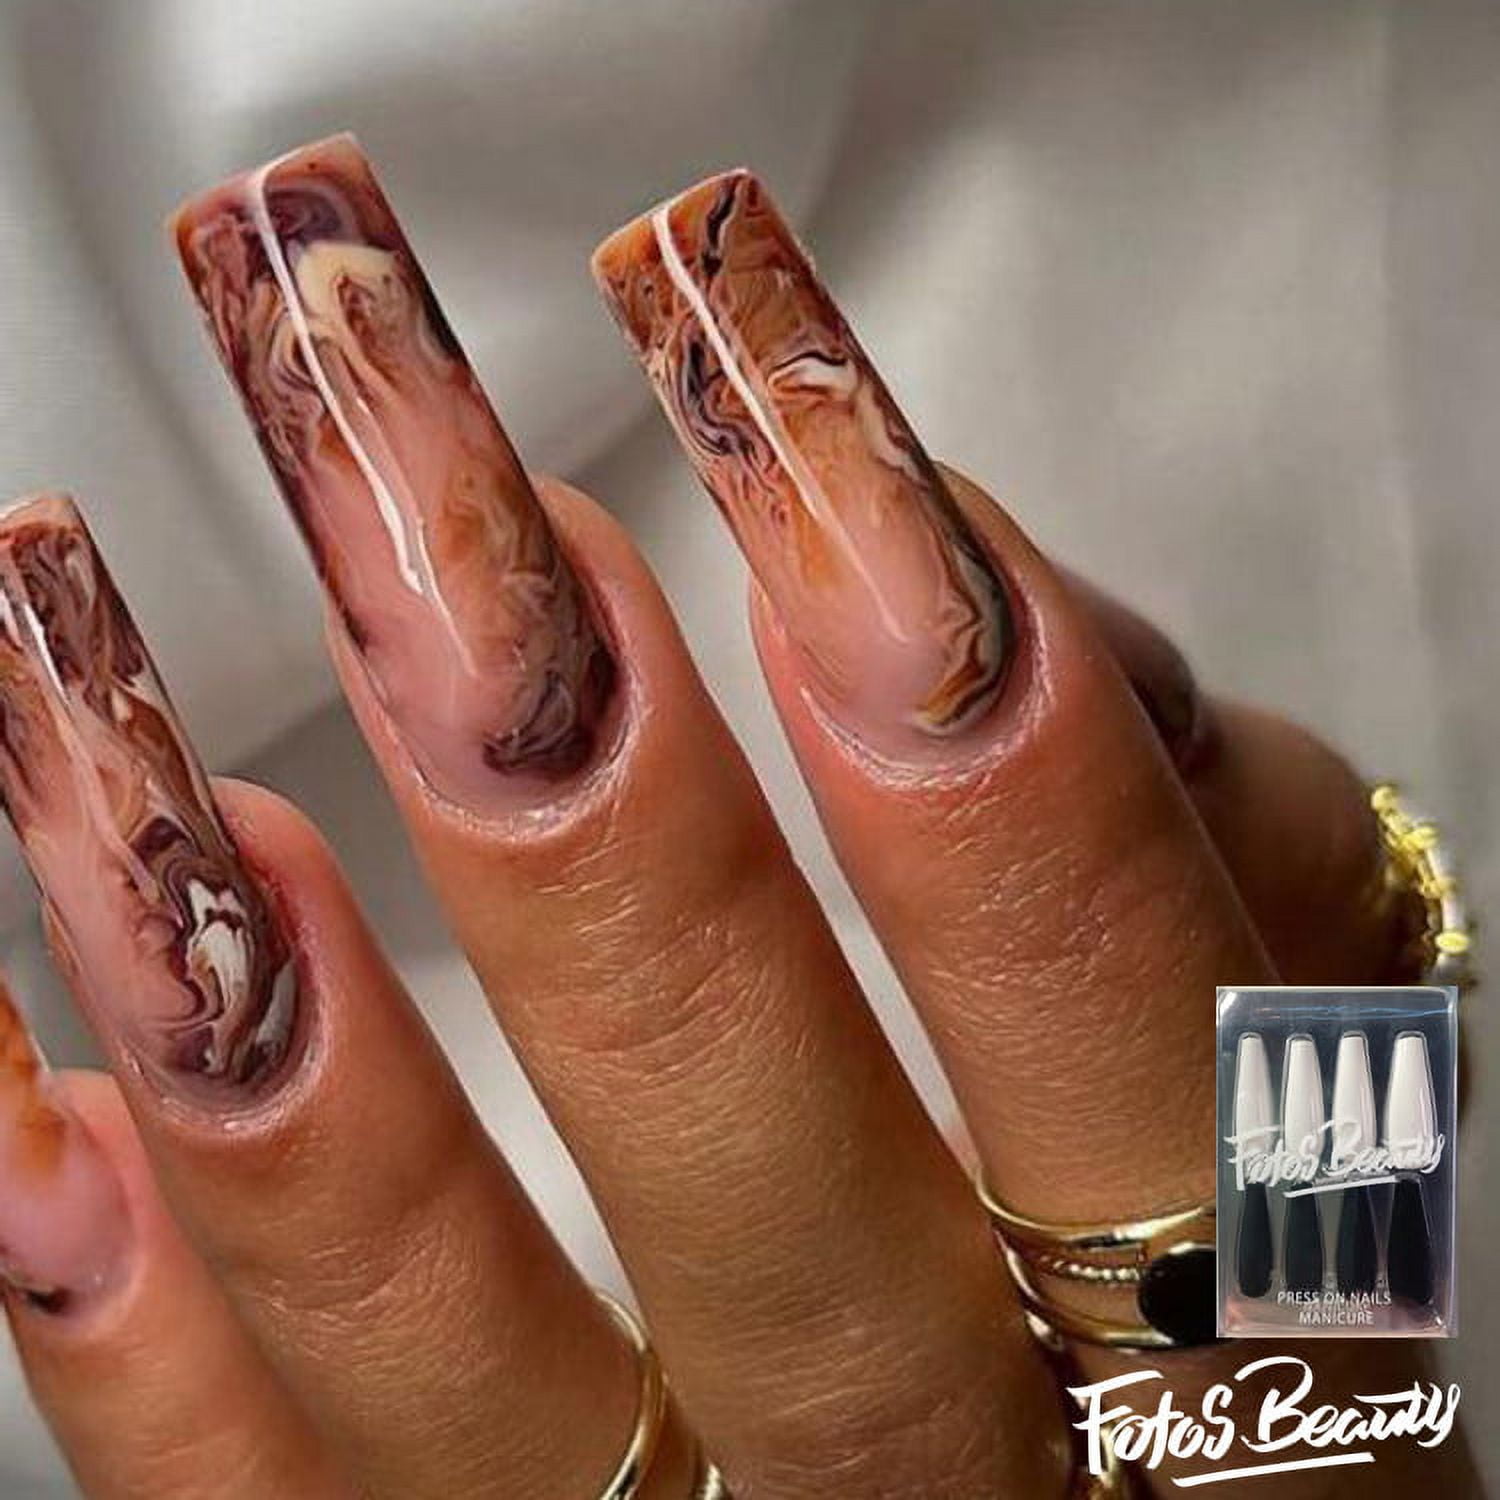 How to: Brown marble design - acrylic nails - YouTube